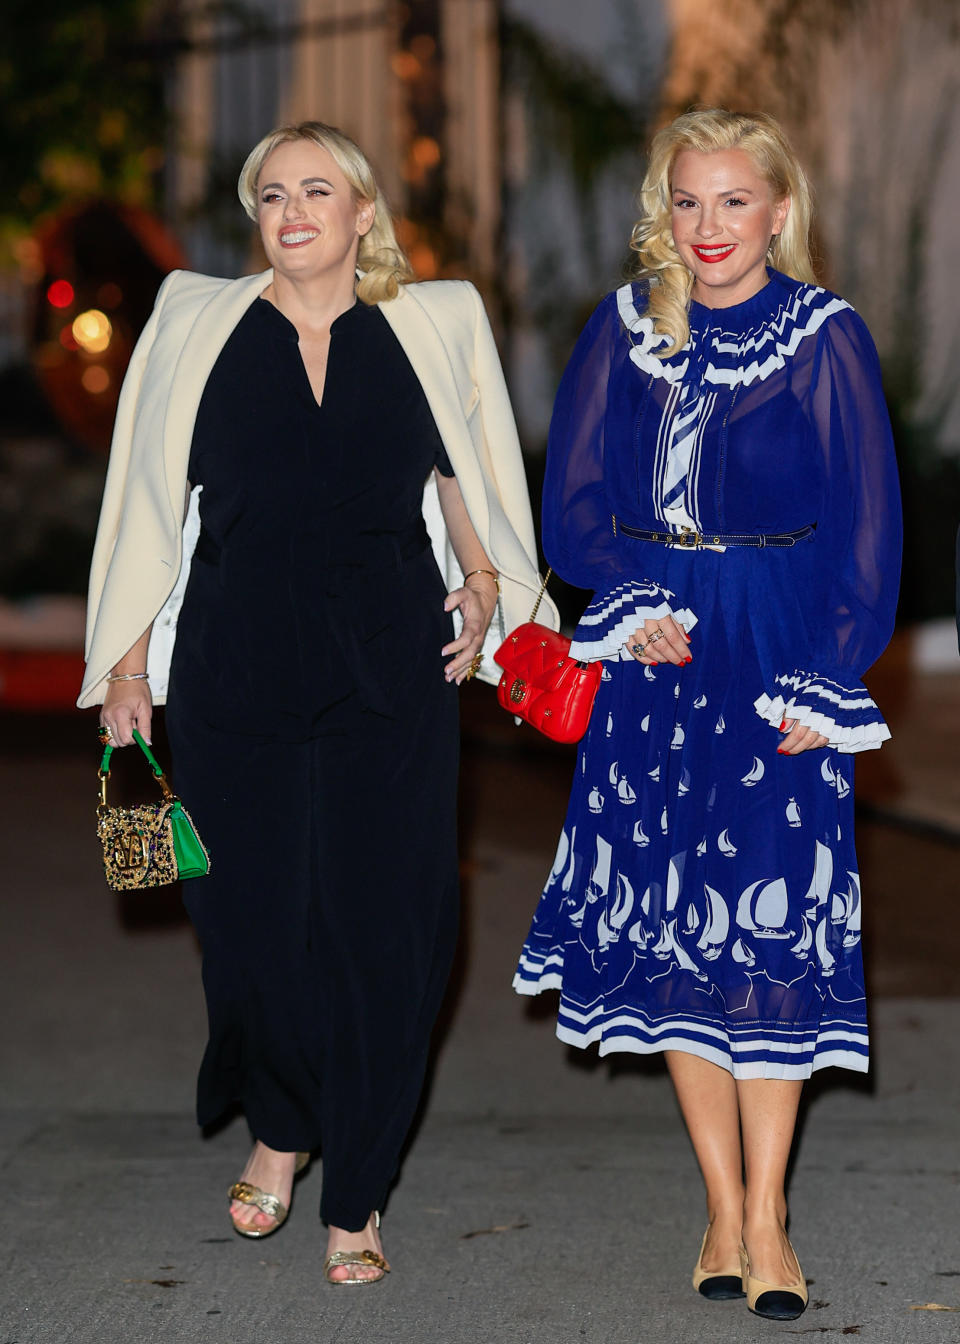 WEST HOLLYWOOD, CA - MARCH 07: Rebel Wilson and Ramona Agruma attend the Hallmann Entertainment Oscar Dinner at Private Residence on March 07, 2024 in West Hollywood, California.  (Photo by Rachpoot/Bauer-Griffin/Getty Images)